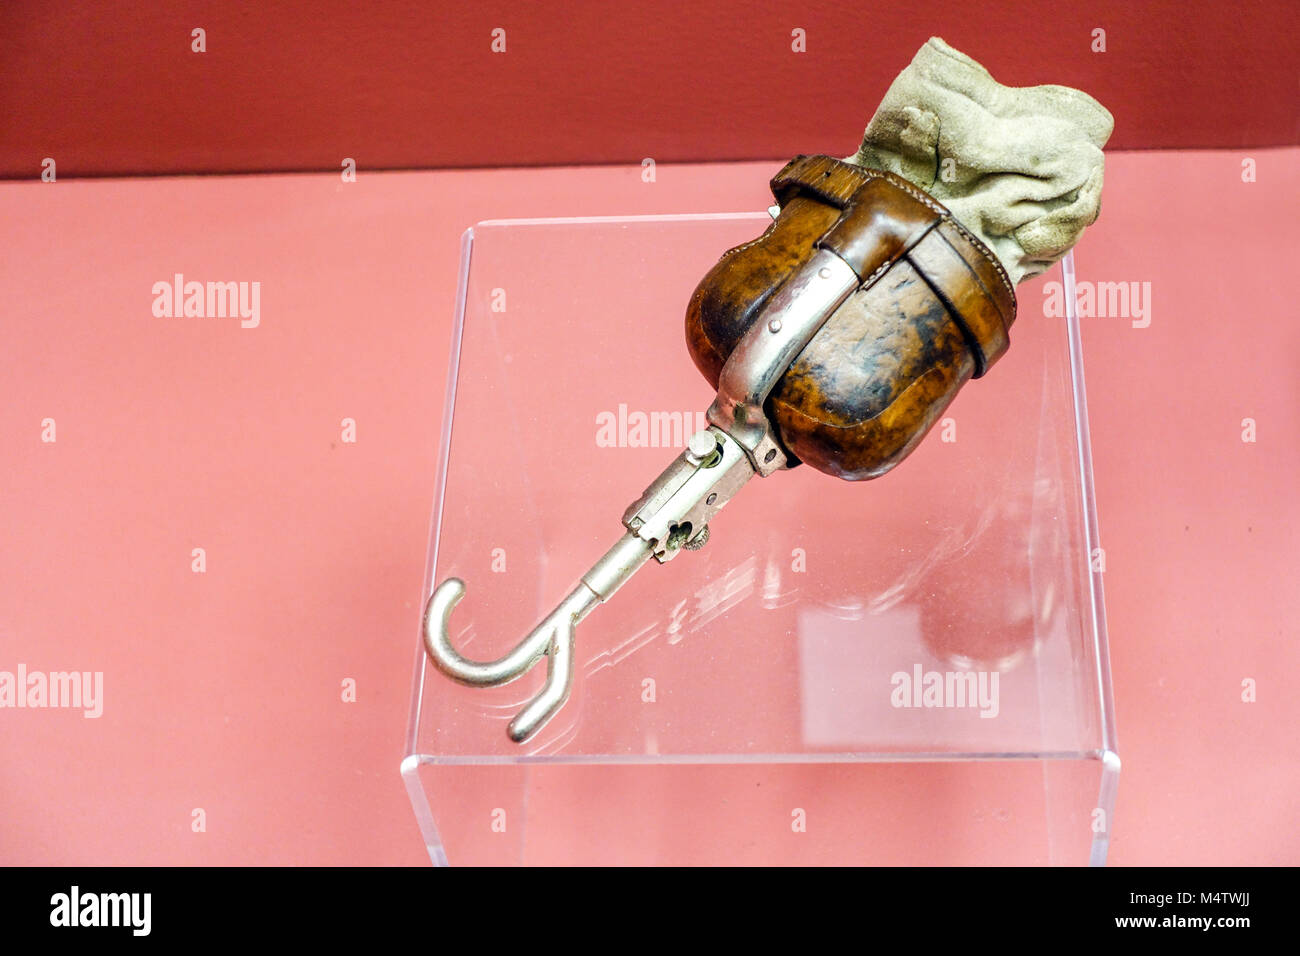 Historical Arm Prothese, prosthesis limb replacement, beginning of the 20th century, National technical museum, Prague, Czech Republic Stock Photo